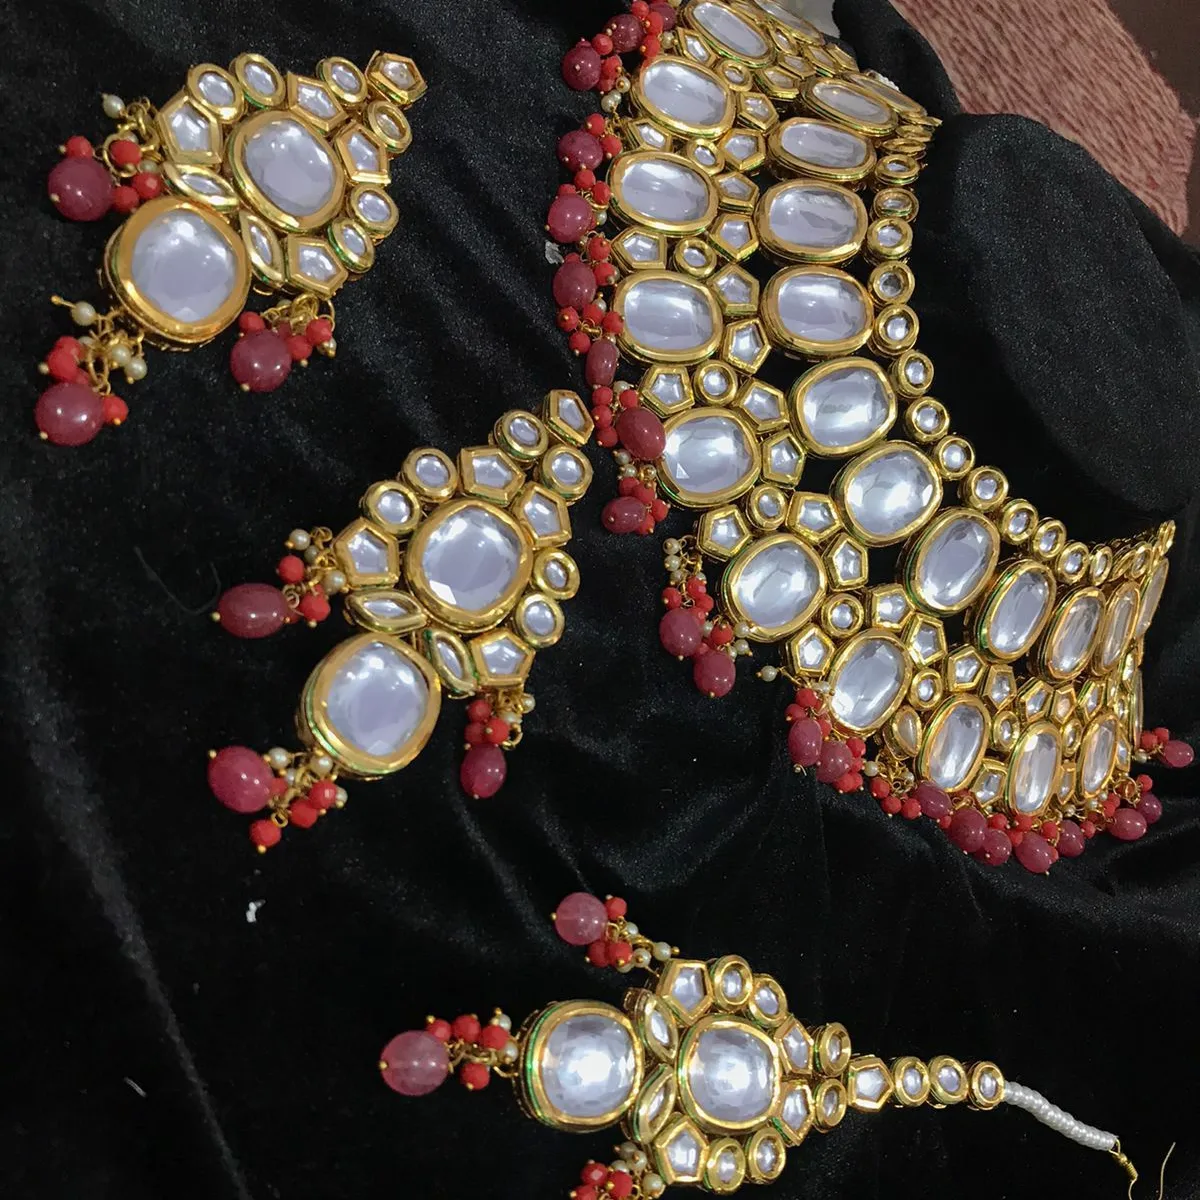 Post image 2399 ready to ship +918949227743New collection premium quality bridel Jewellery
👌Price : 
*product name* perium quality
✅DM Us On Our Page For Order_____________________________🤳📱Join our WhatsApp group for daily update😊WhatsApp on +918949227743
https://wa.me/message/2ECYLFVWRYVEM1______________________________🚚HomeDelivery All Over INDIA 🇮🇳Within 7 to 10 Working Days (Free Shipping )
🌍world wide shipping 📦📦_____________________________
📌 Payment Accepted Via Paytm/ Bank Transfer / Google pay/ PhonePe/ UPI ↩️ Return or Exchange Available Only In Case Of Defect or Damaged ( Opening Video Of Damaged Product Is Required ) 
______________________________💎 GREAT QUALITY PRODUCTS 👌🏻❌ CASH ON DELIVERY AVAILABL_______________________________----------our social media----------
⚫Meet Us On WhatsApp -https://wa.me/message/2ECYLFVWRYVEM1
⚫Follow Us on Facebook 🥰 - https://www.facebook.com/rinku.saini.71066
⚫Subscribe❤ our You tube channel 📺-https://youtube.com/channel/UC0lf2iHCIg2ikzM8FZTQHLA___________________________________Store Timing : 11am -8pmStore Location : jaipur rajasthanE: info@missrinkusaini26/// #jewelrydesigner #jewelrydesign #kundlibhagya #tanyasharma #sarya12 #design #tanyasharma #anupama#missrinkusaini26 #rinkunsainilvjewellers #fashionillustration #fashionblog #fashionphotography #jewelleryphotography #bridelook#weddingseason #missrinkusaini26 #bollywoodactor #himanshikhurana #divyaagarwal #shanaazgill #manishmalhotra #fashionweek#fashionable #fashionlover
Follow-@missrinkusaini26